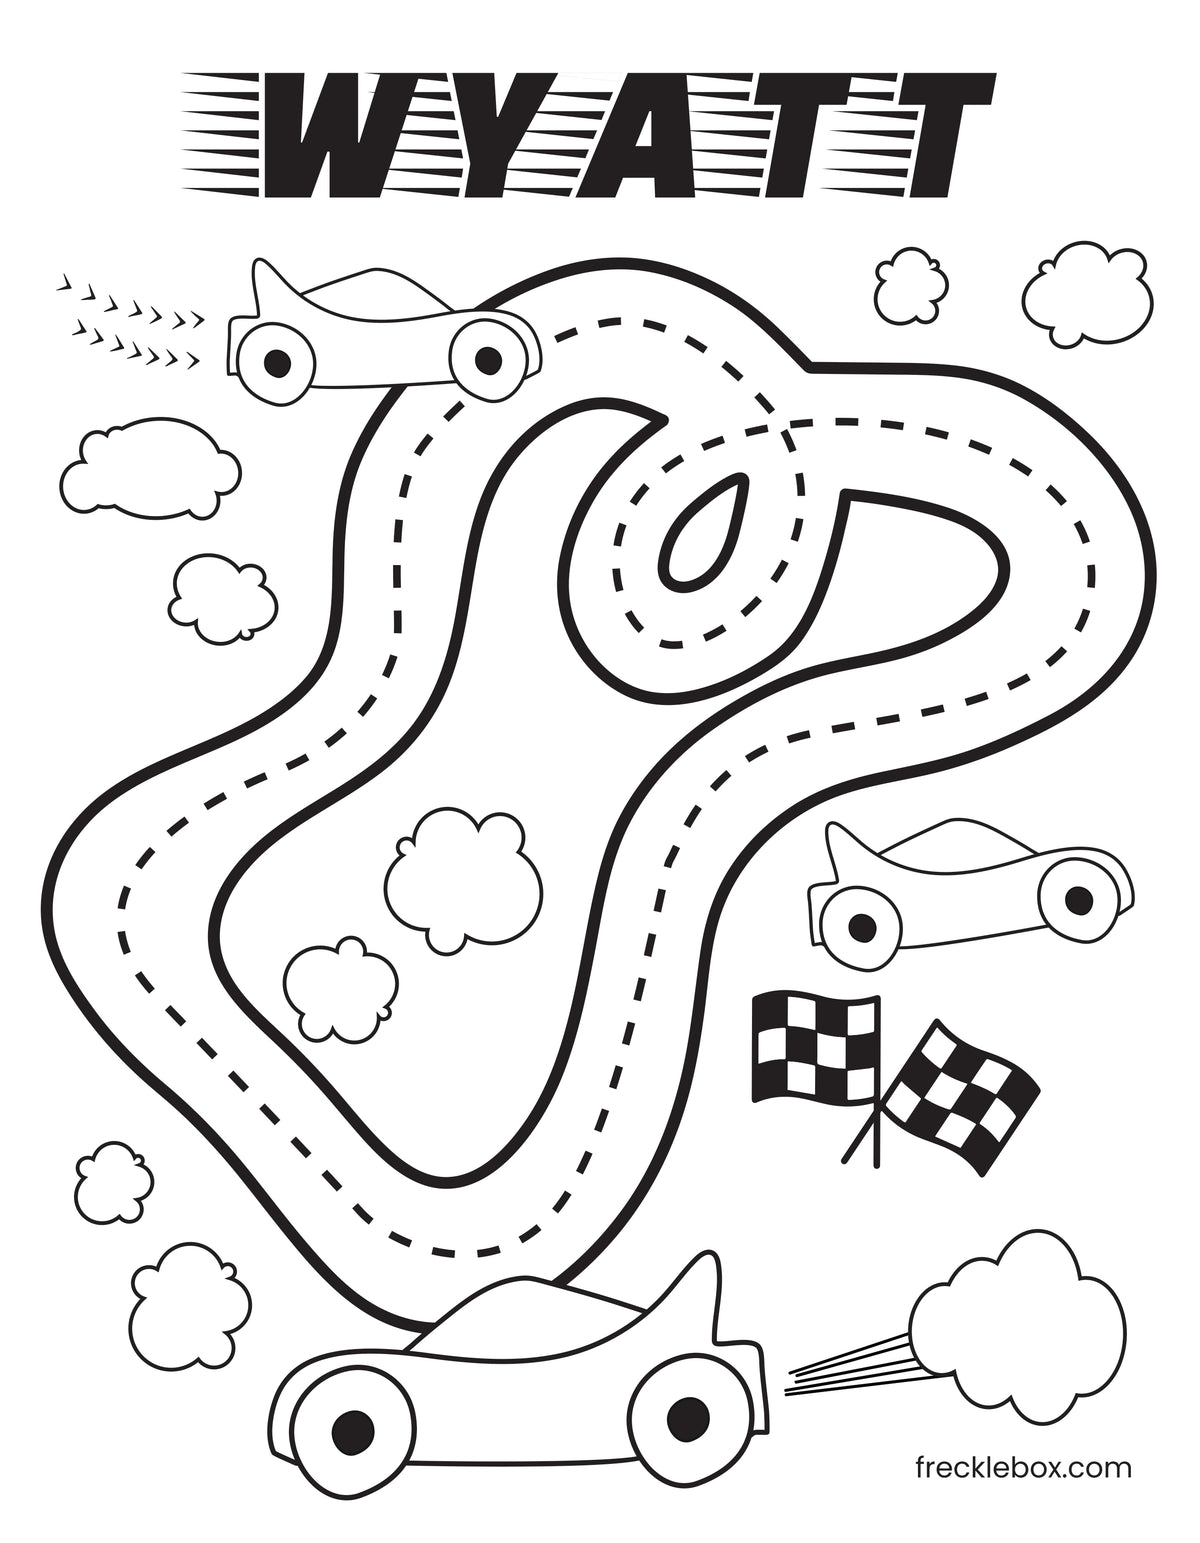 Free coloring page for kids featuring racetrack , cars and child&#39;s name.